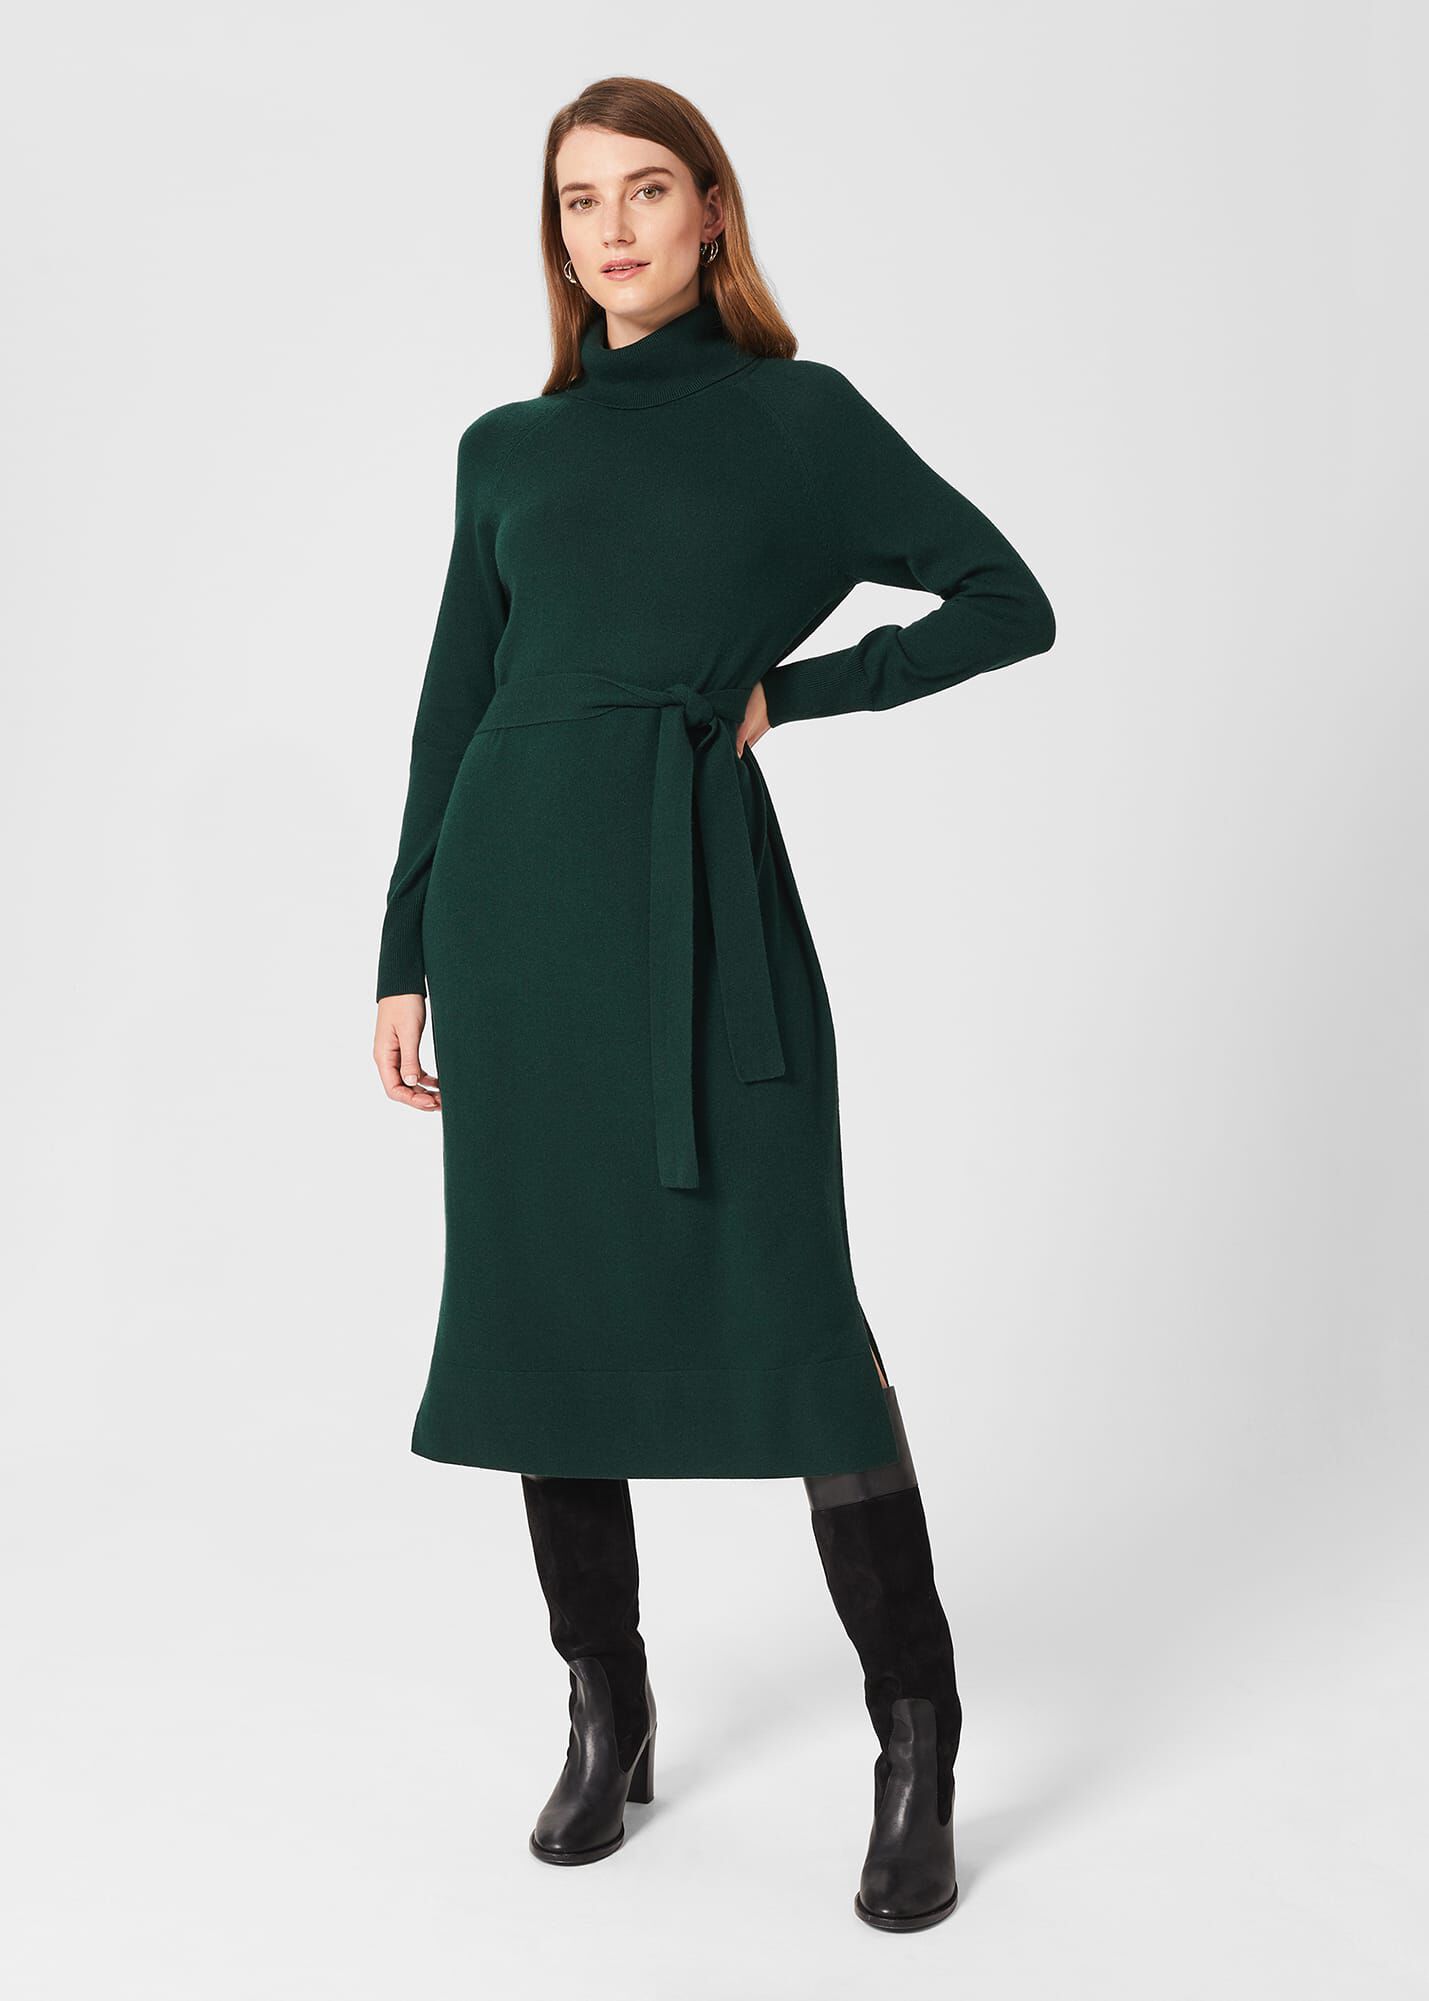 Shift Dresses | Tailored, Work, Party & Occasion Dresses | Hobbs 